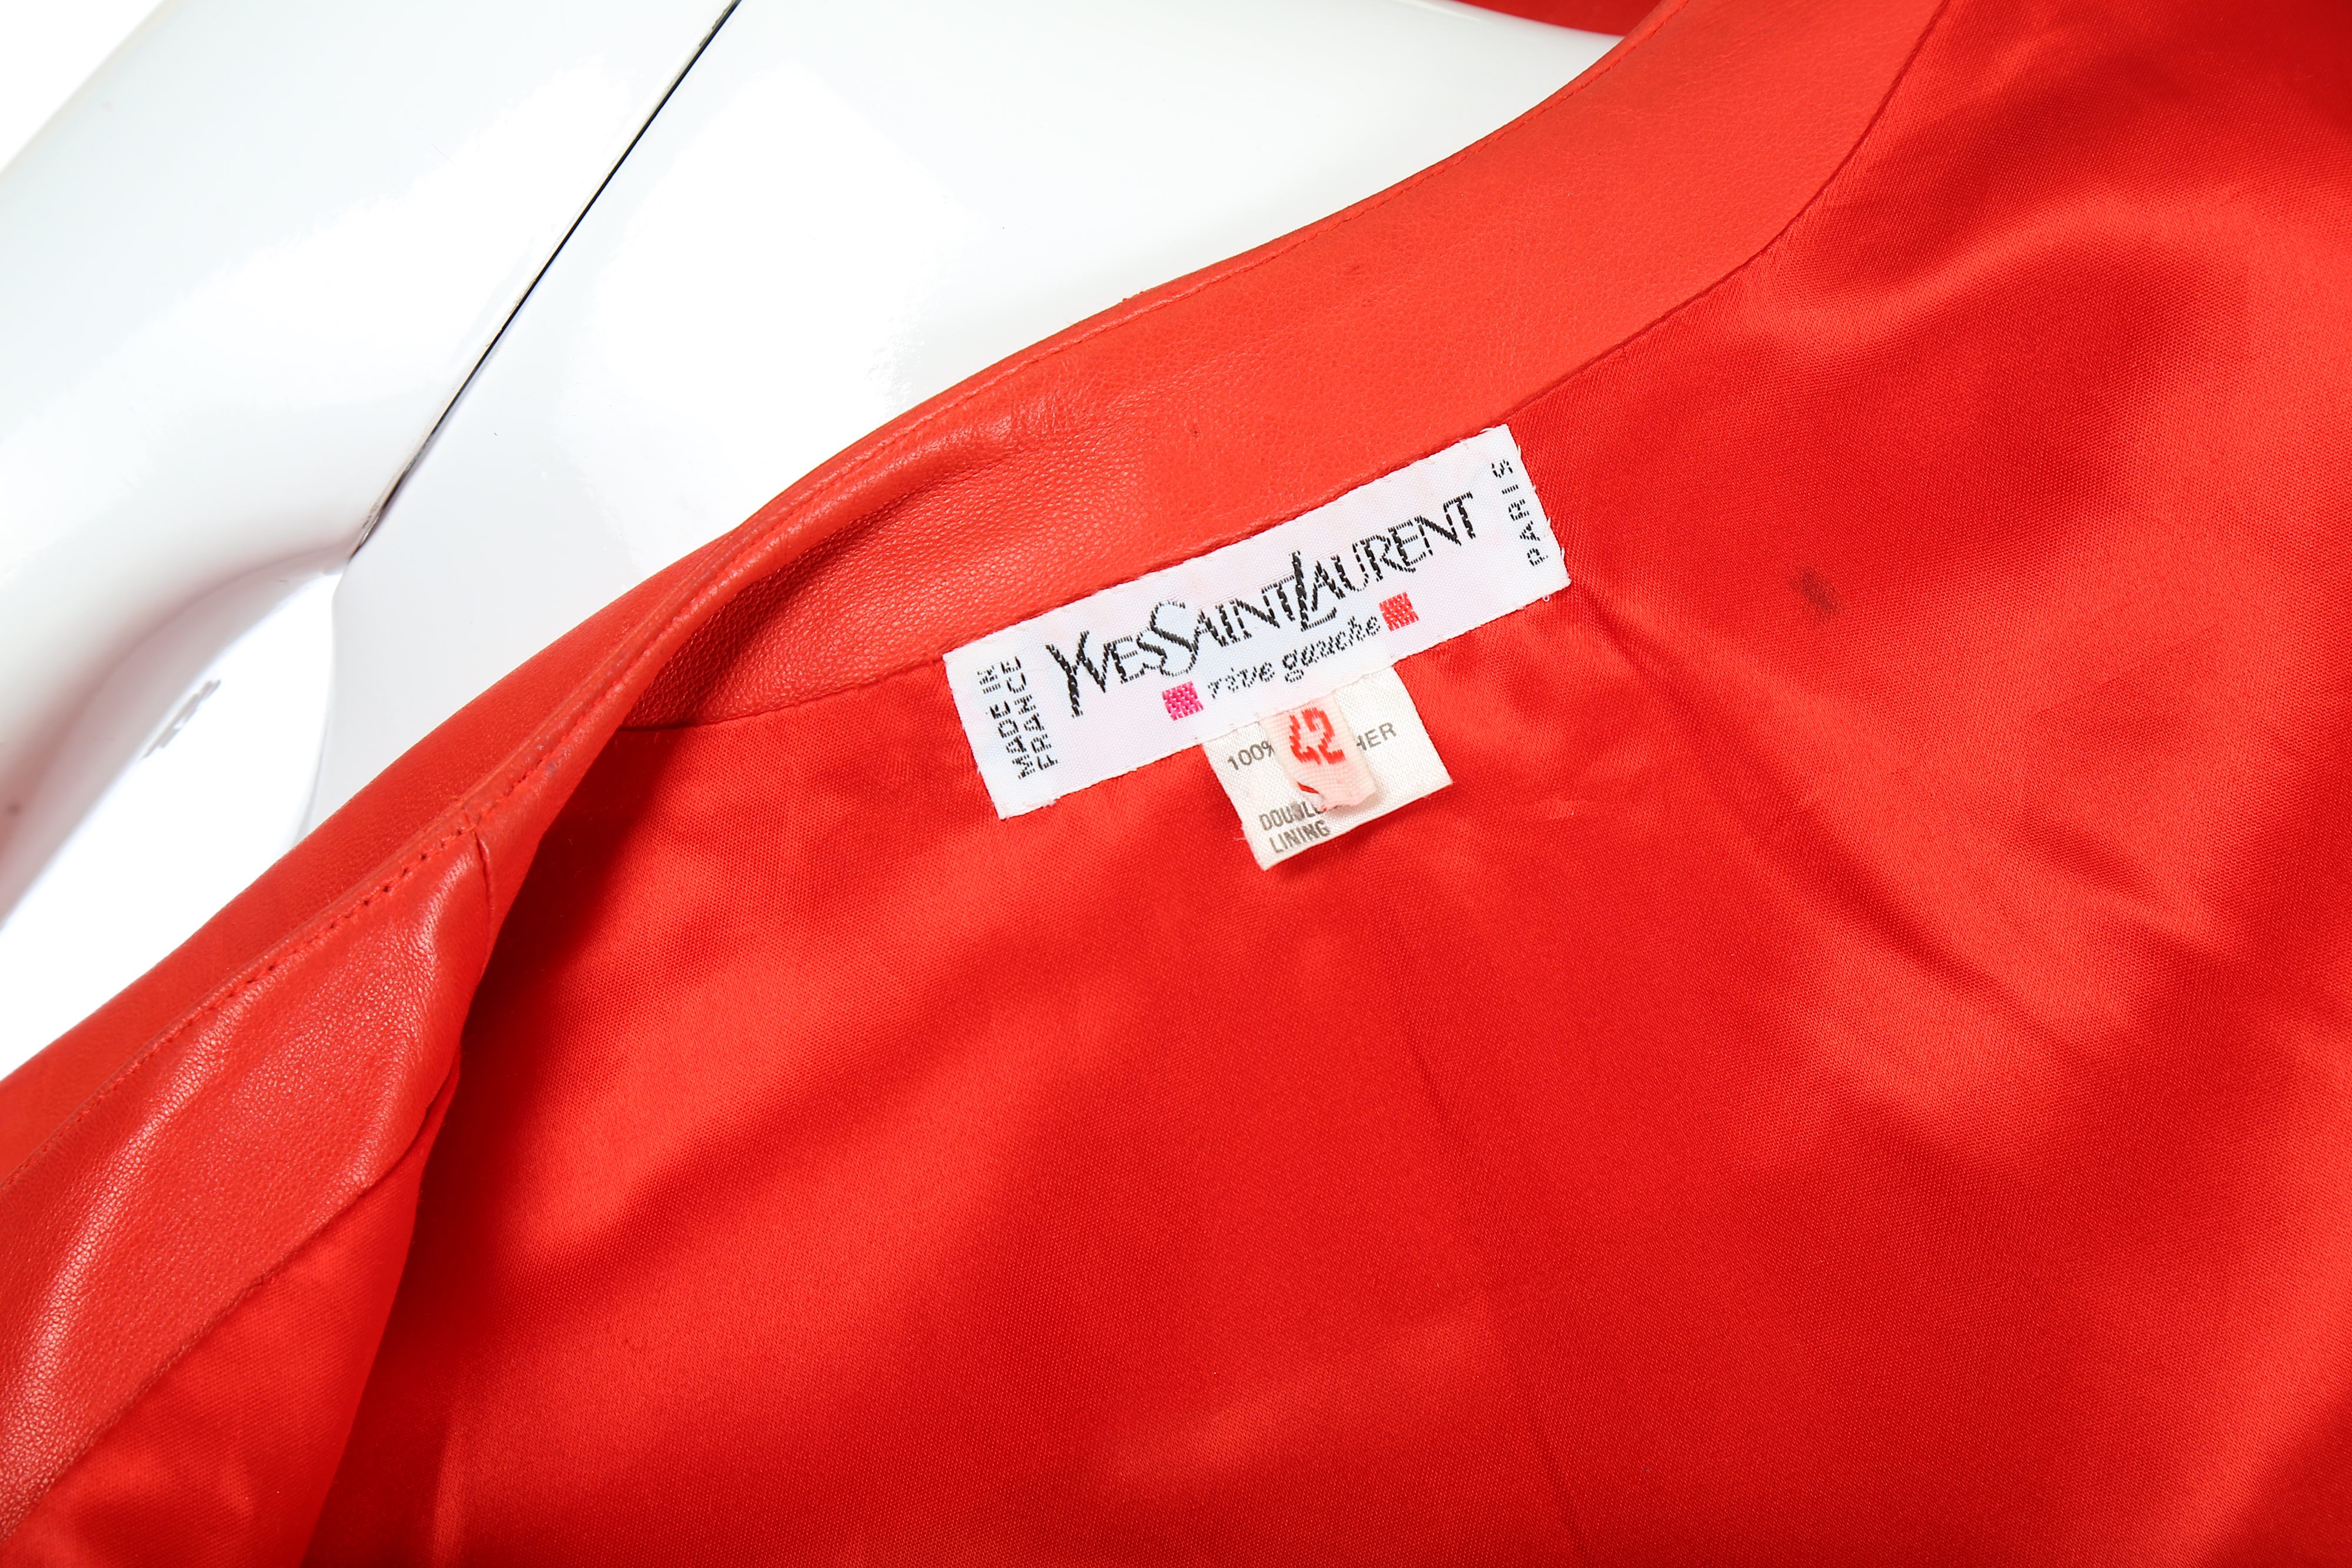 Yves Saint Laurent Red Leather Jacket - size 42 - Image 4 of 4